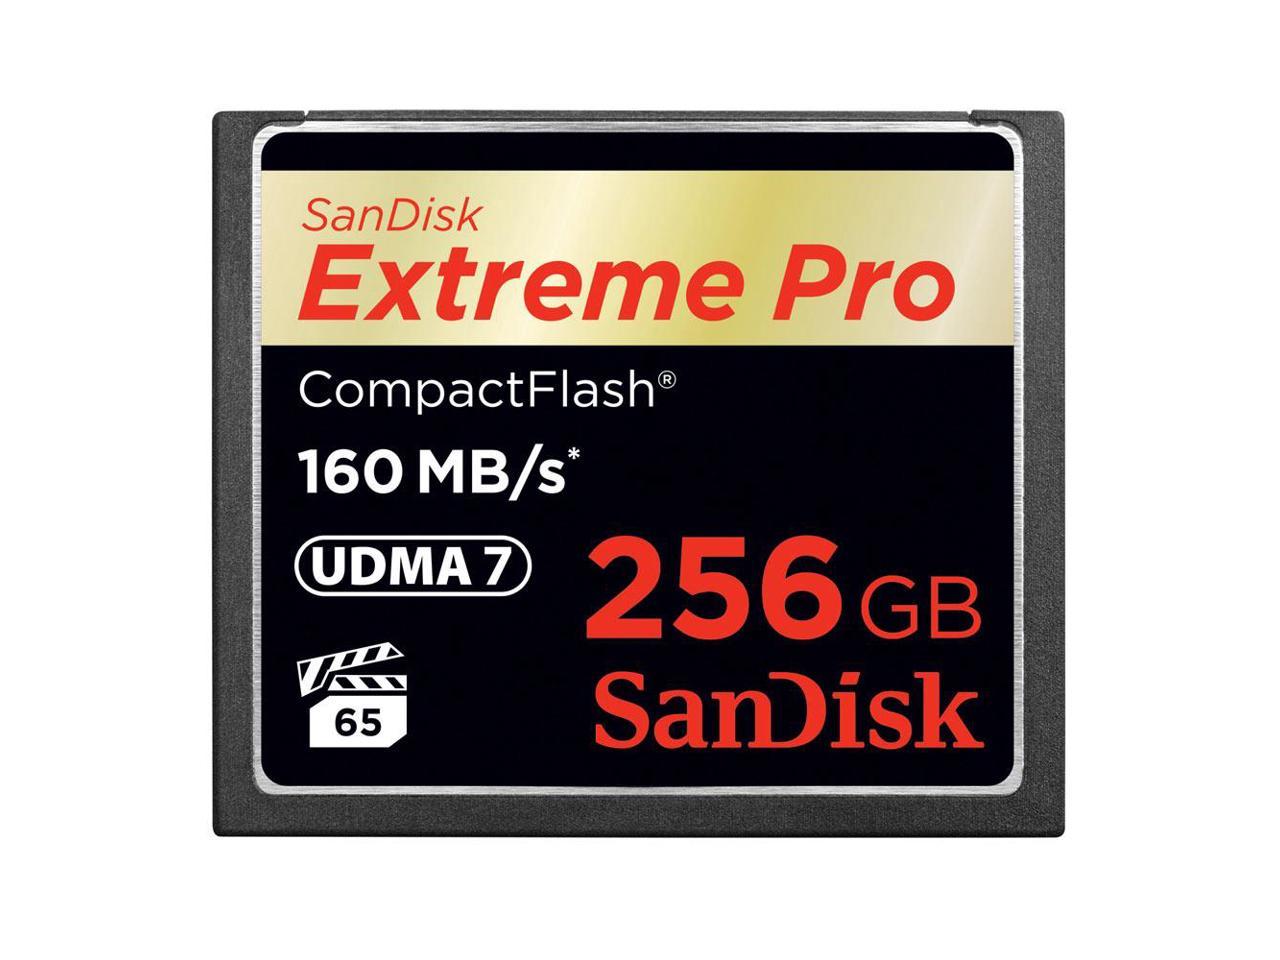 SDCFXPS-256G-X46 SanDisk Extreme PRO 256GB CompactFlash Memory Card UDMA 7 Speed Up To 160MB/s 